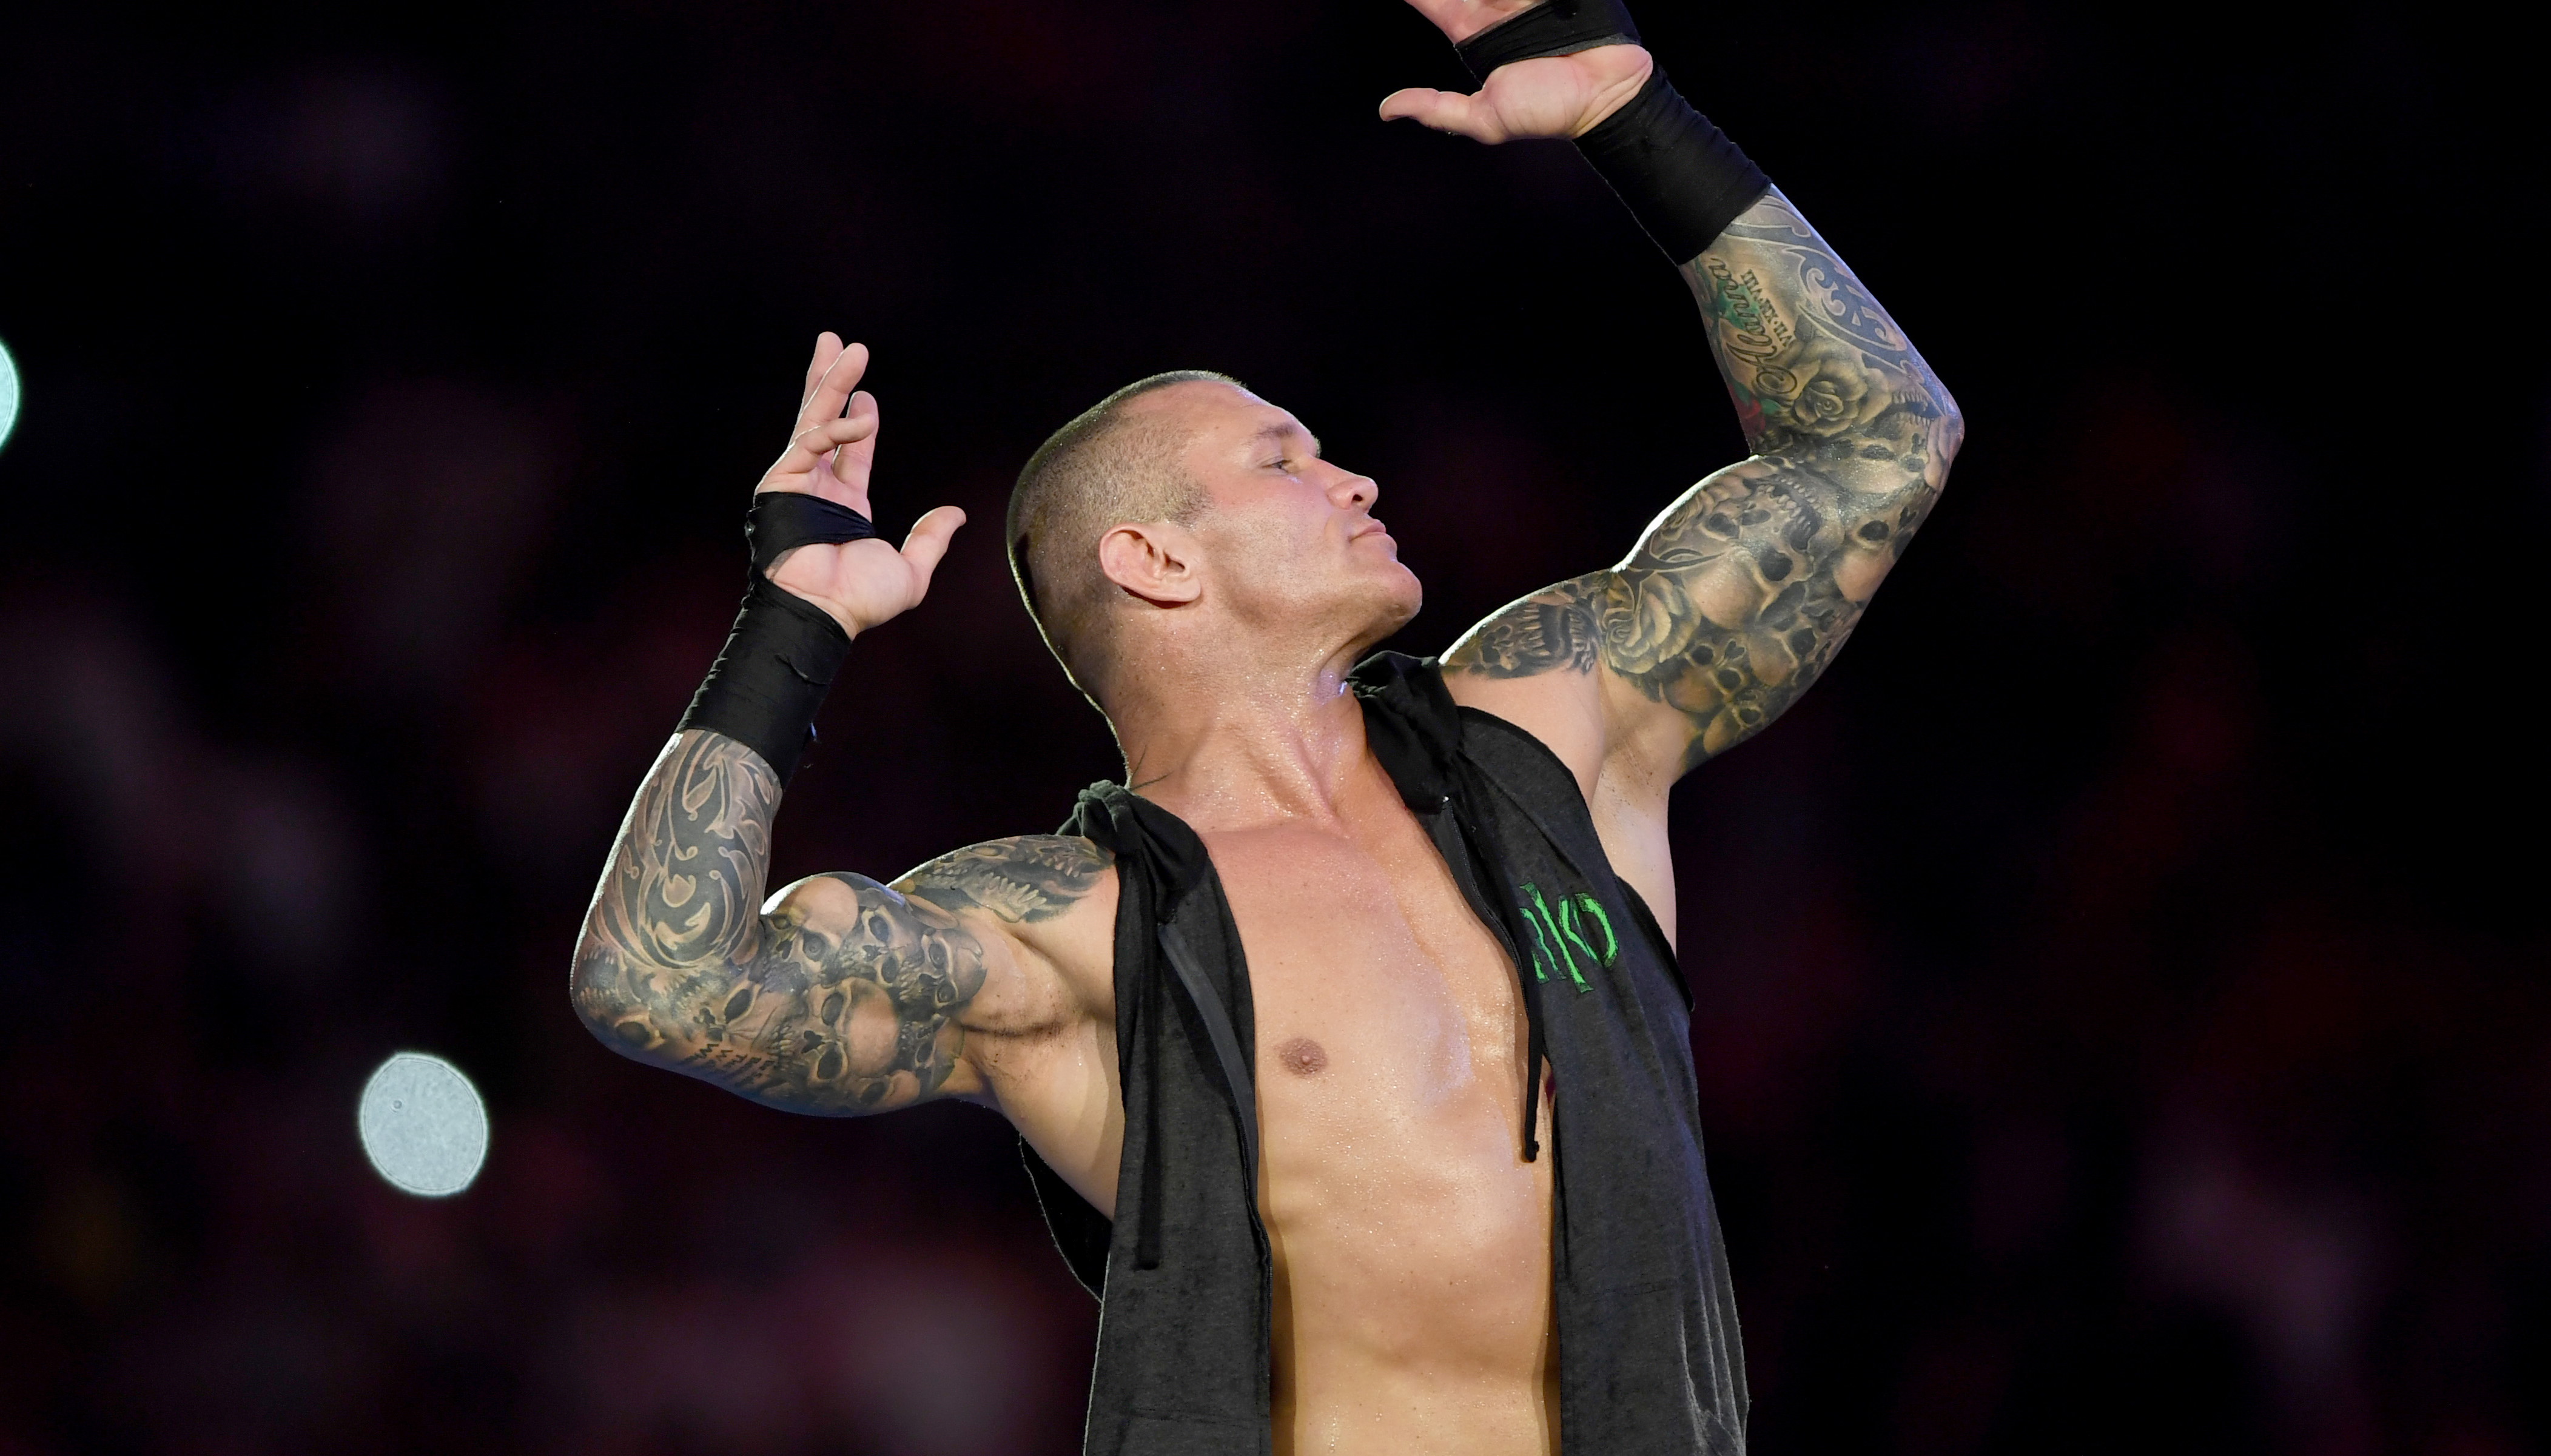  Tattoo artist lays a legal RKO on Take-Two over Randy Orton's ink in WWE 2K games 